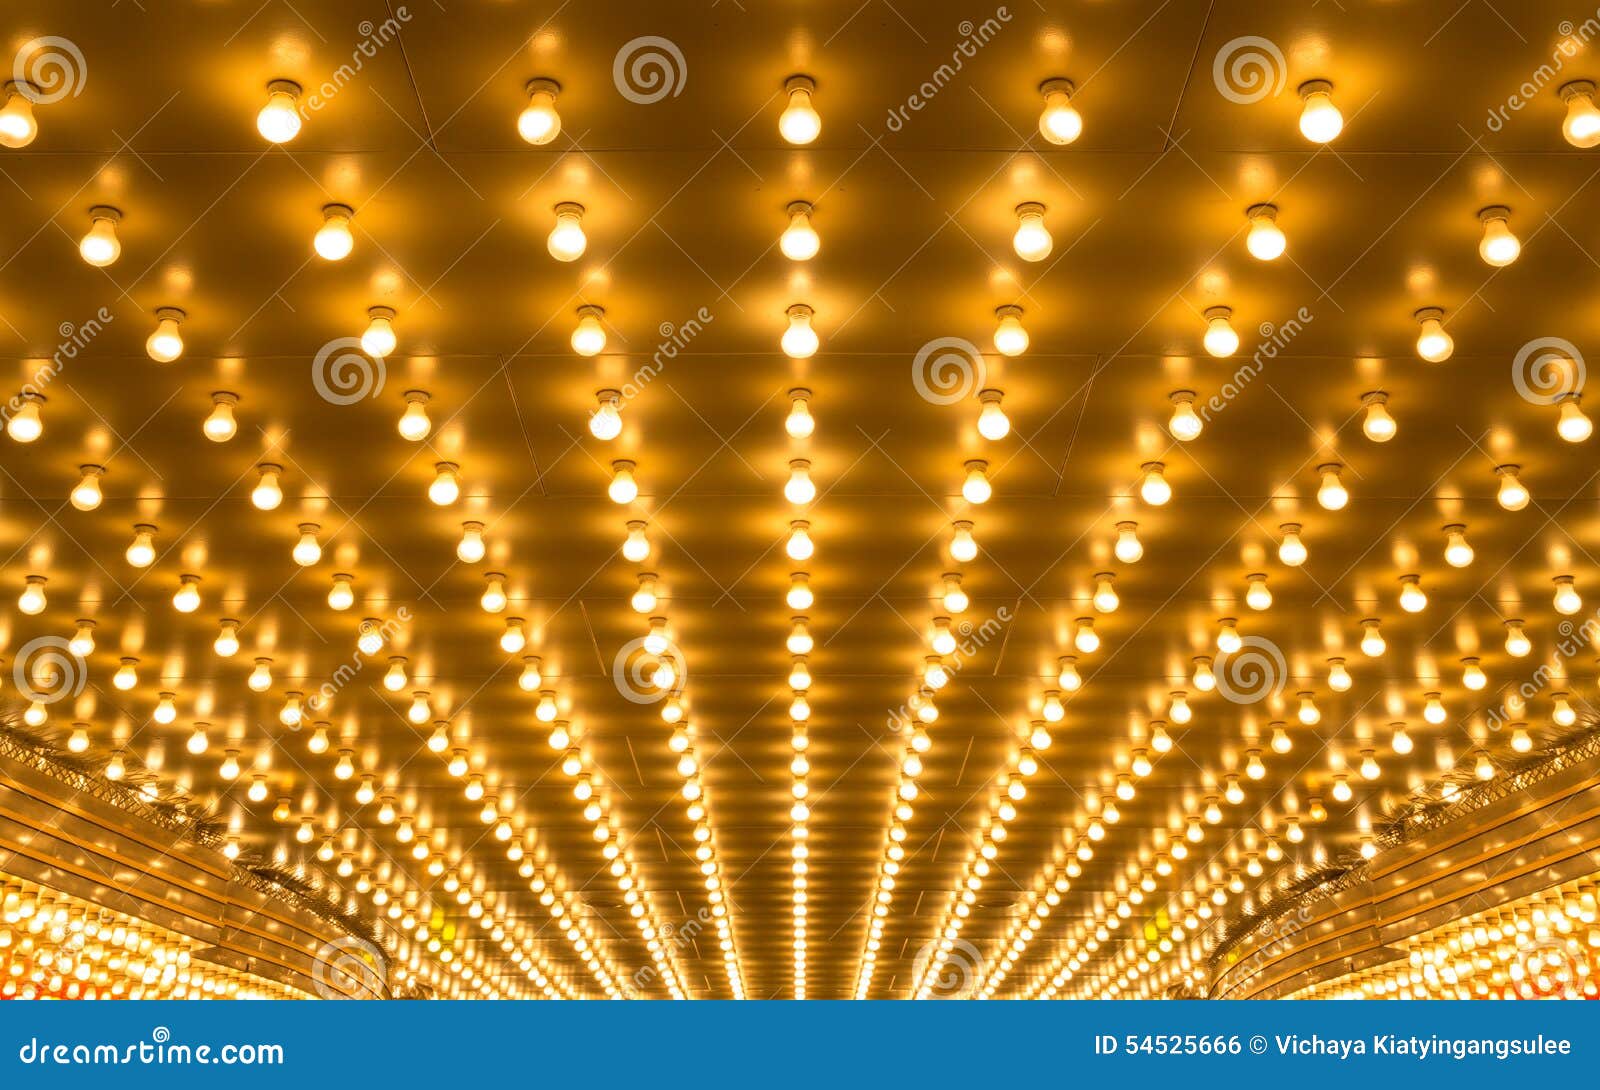 marquee lights